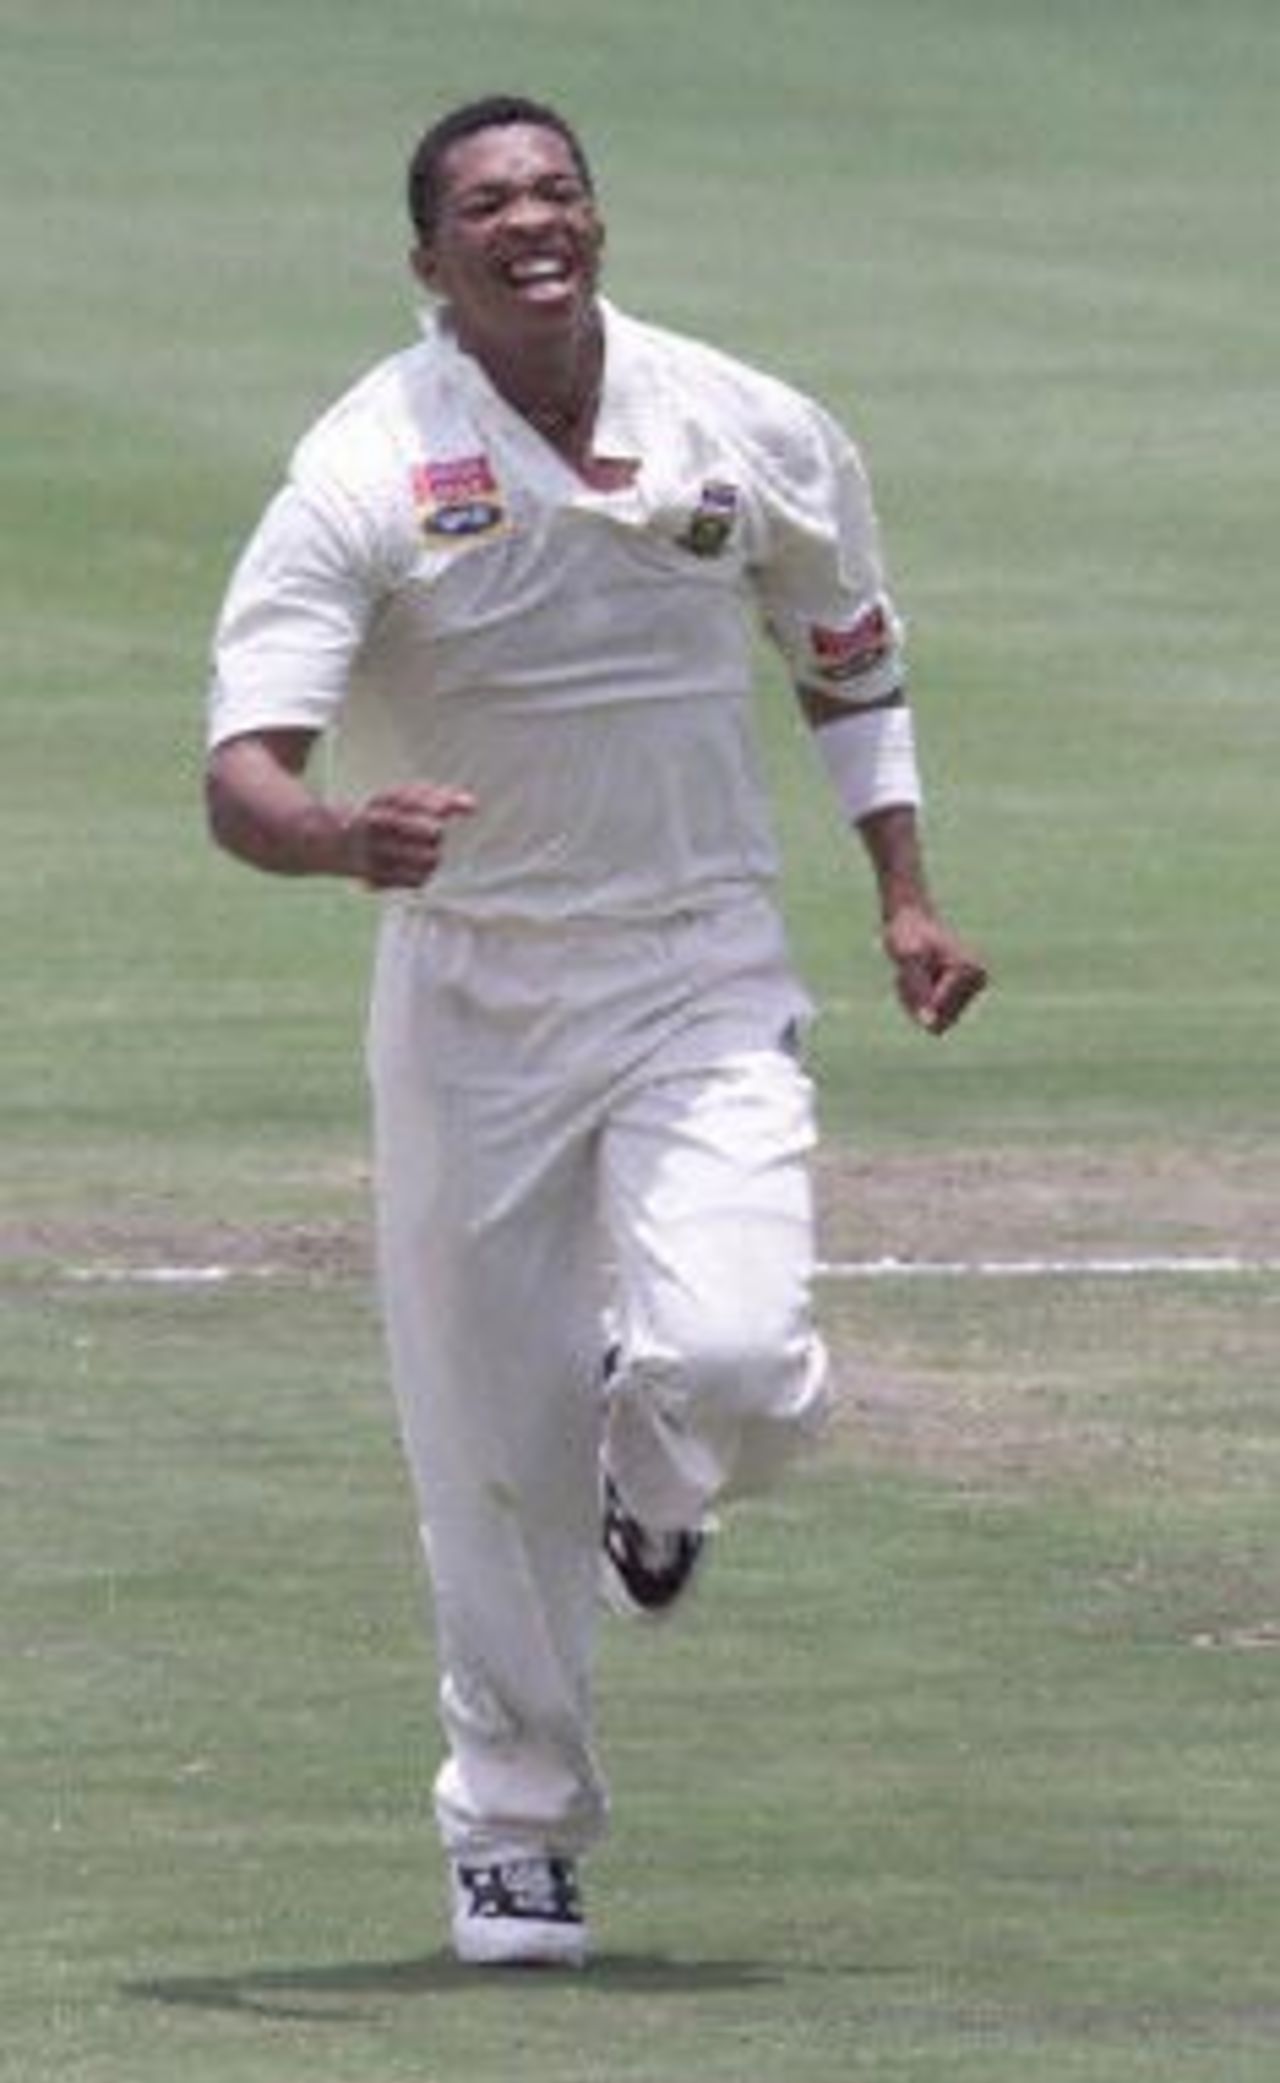 South African bowler Makhaya Ntini celebrates the wicket of Mahela Jayawardene on the second day of the third and final Test between South Africa and Sri Lanka at Centurion Park 21 January 2001.